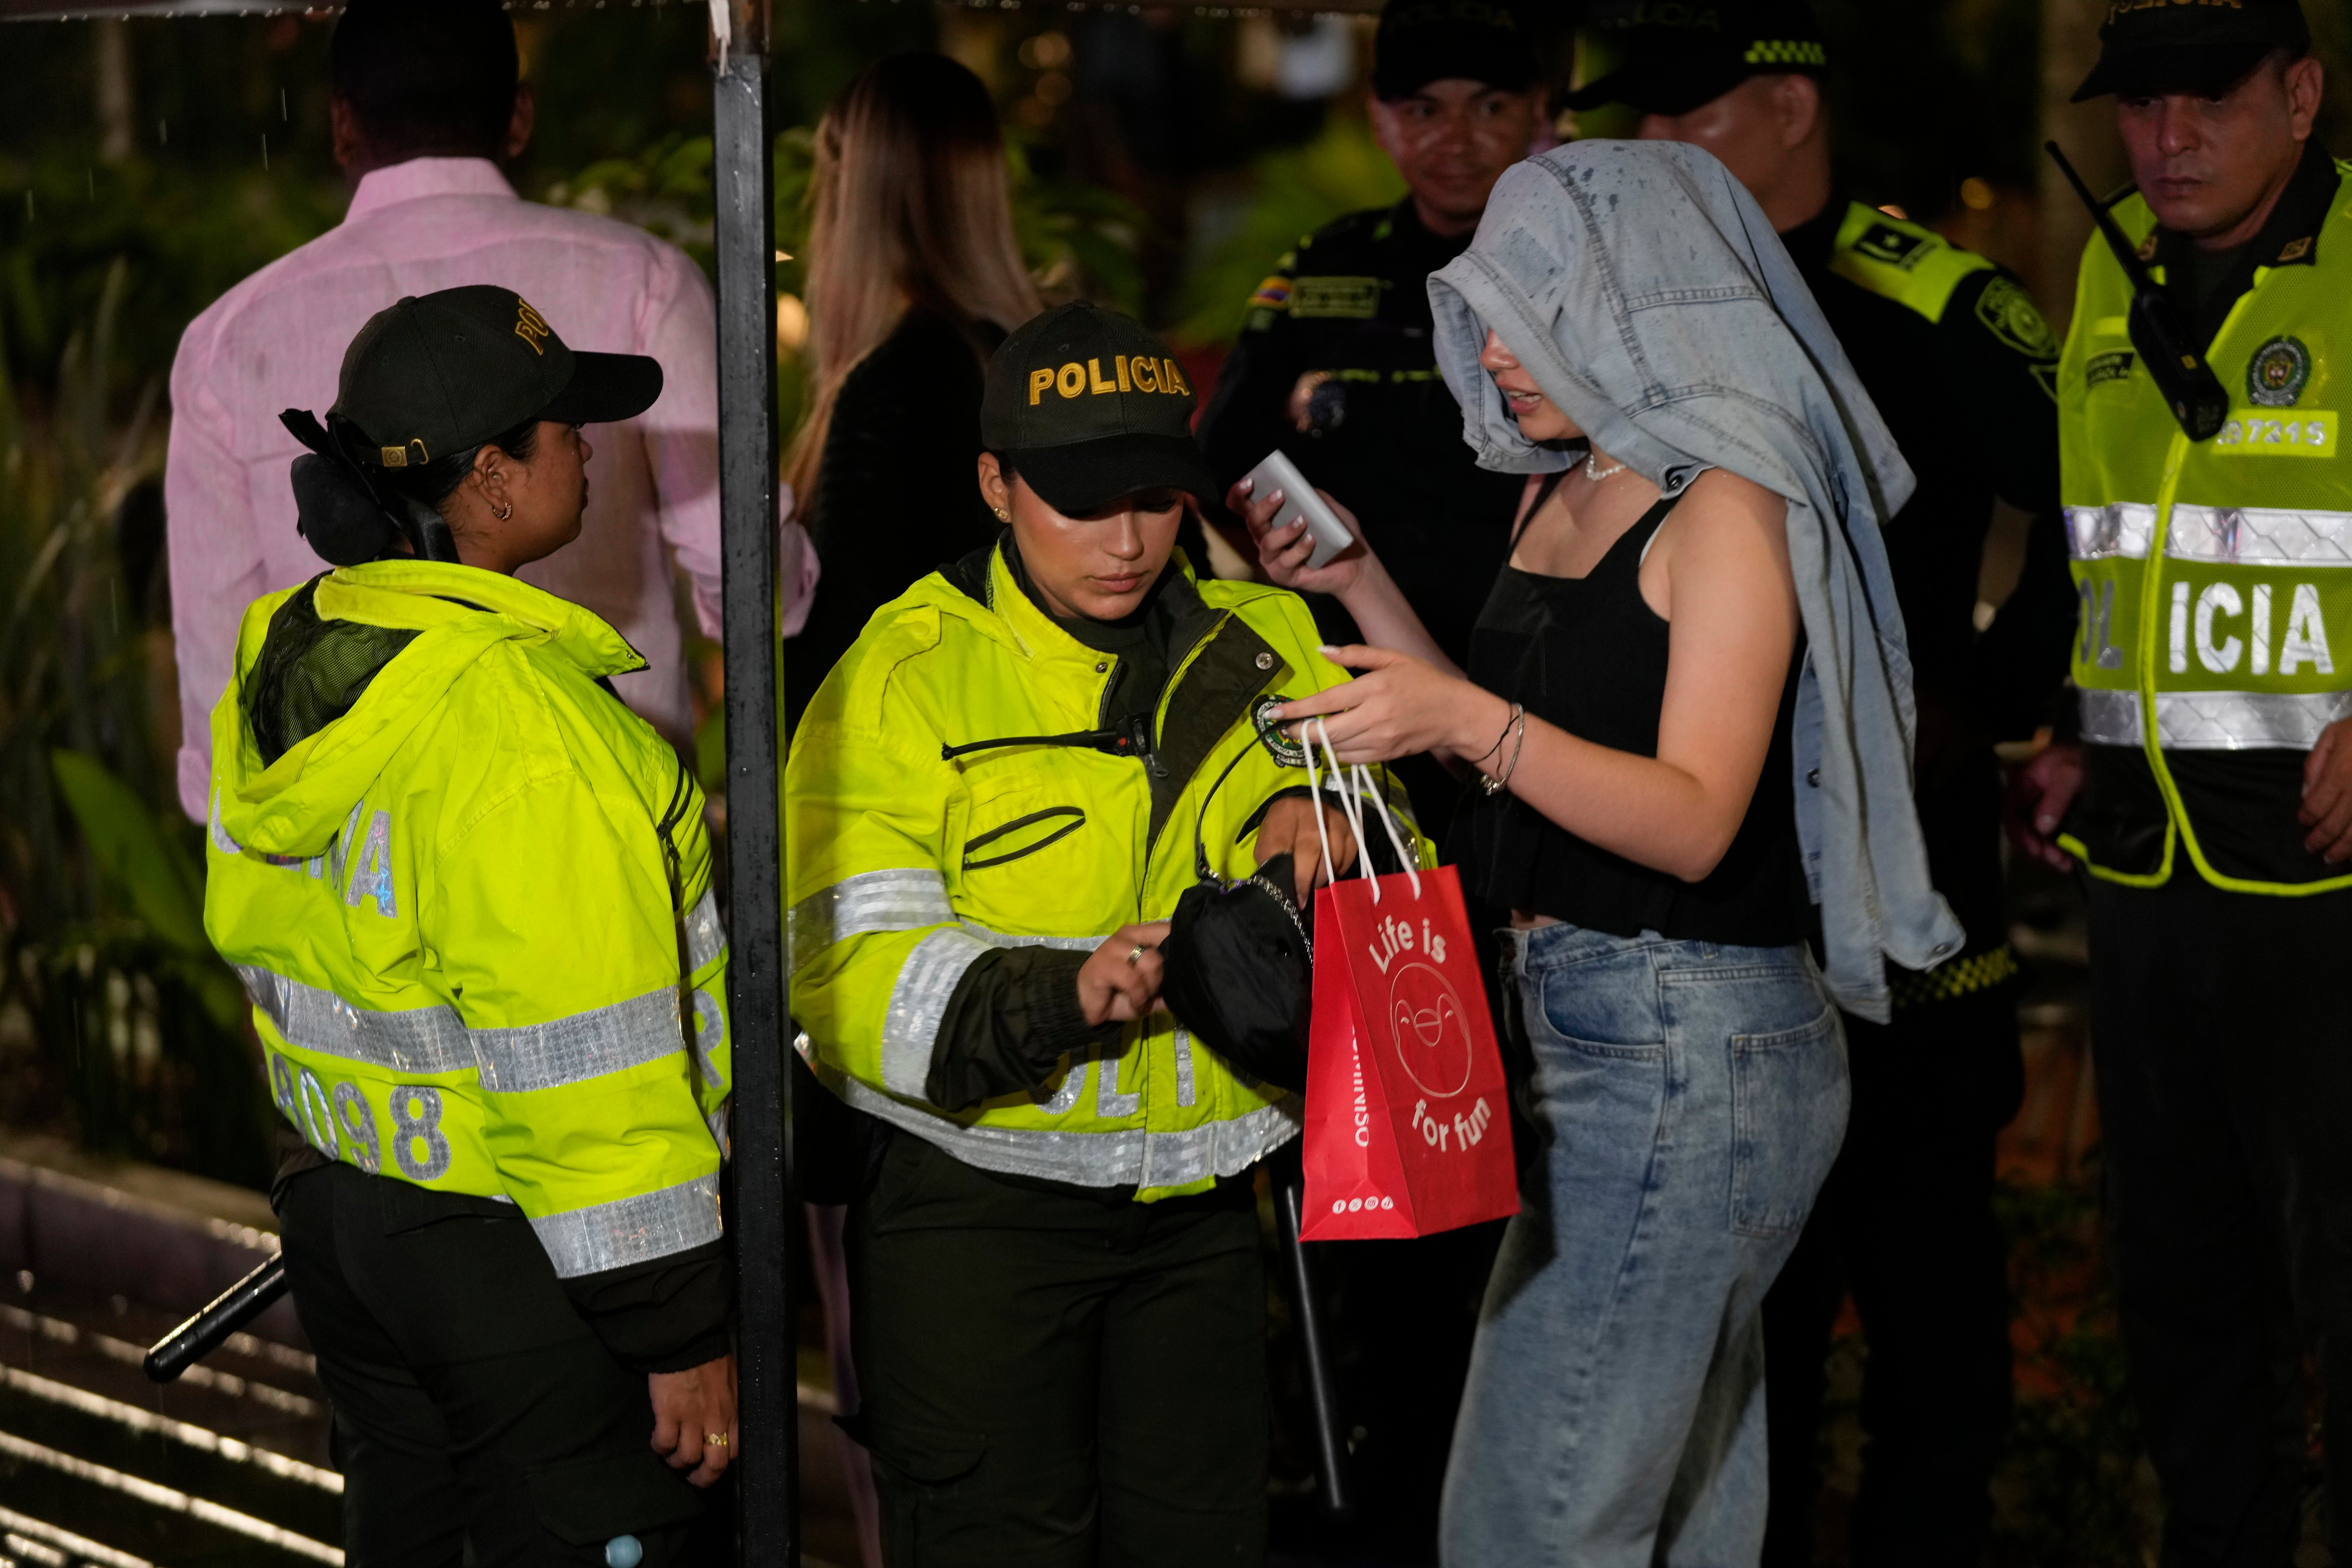 Police ask a woman for proof of age at a checkpoint at an entrance to Lleras Park during an operation to enforce a curfew